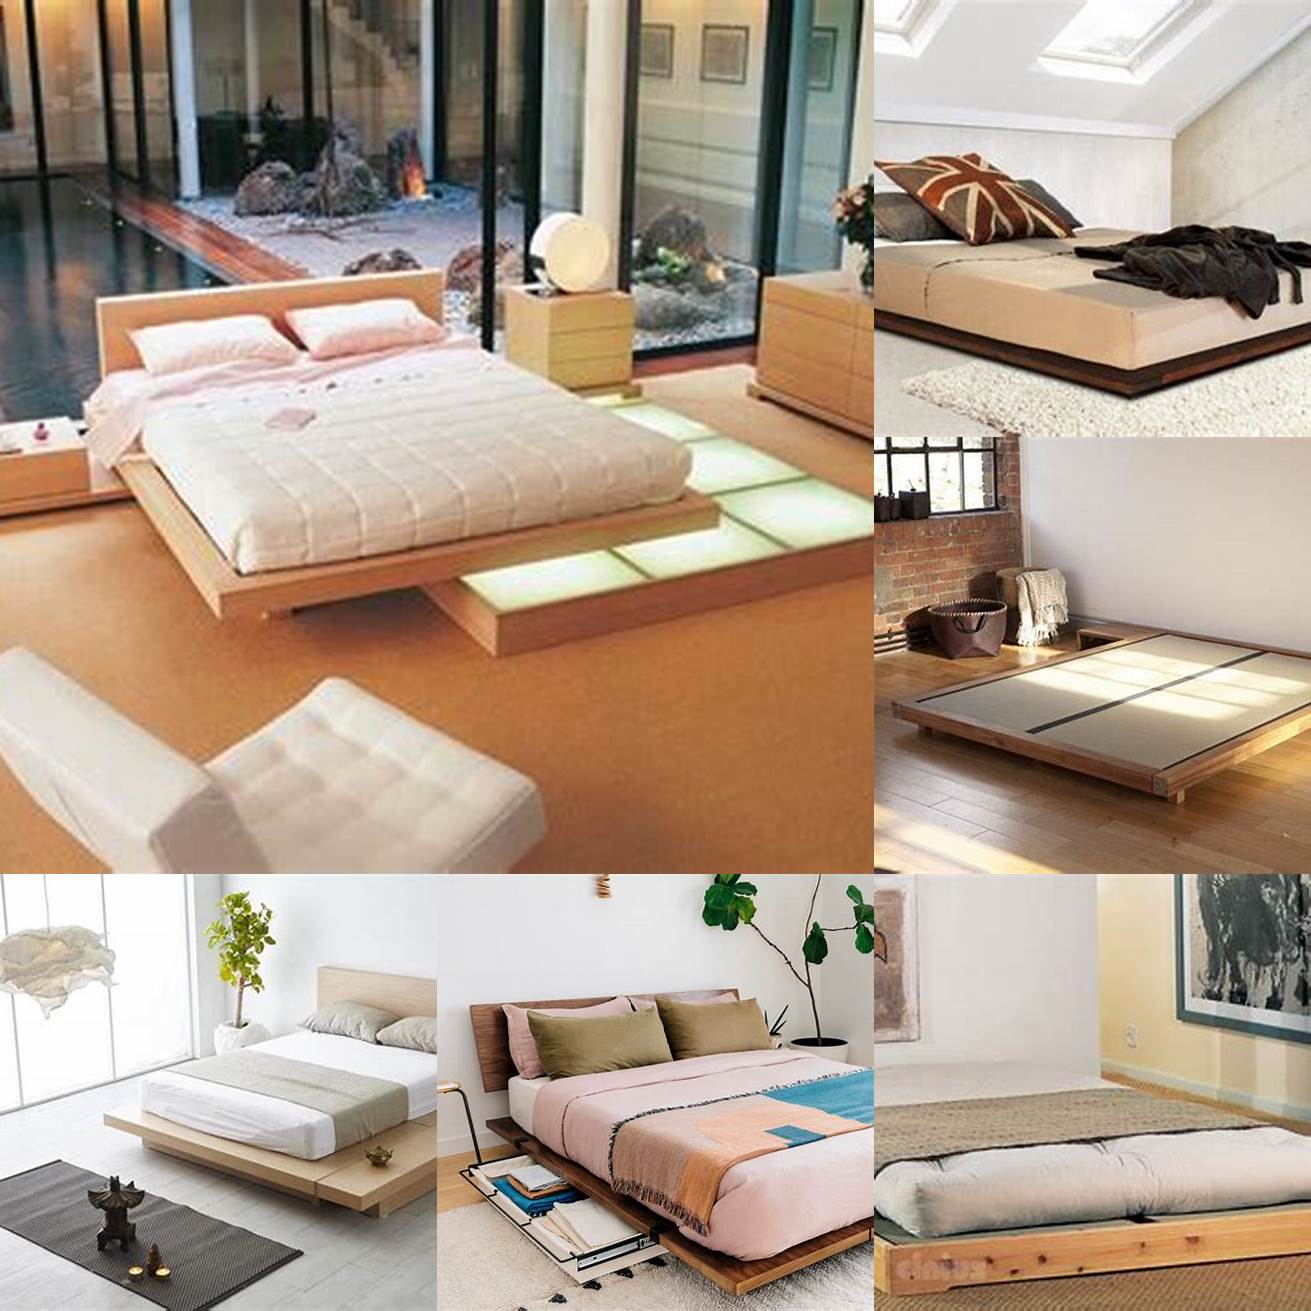 A modern tatami bed with a wooden frame and low-profile design